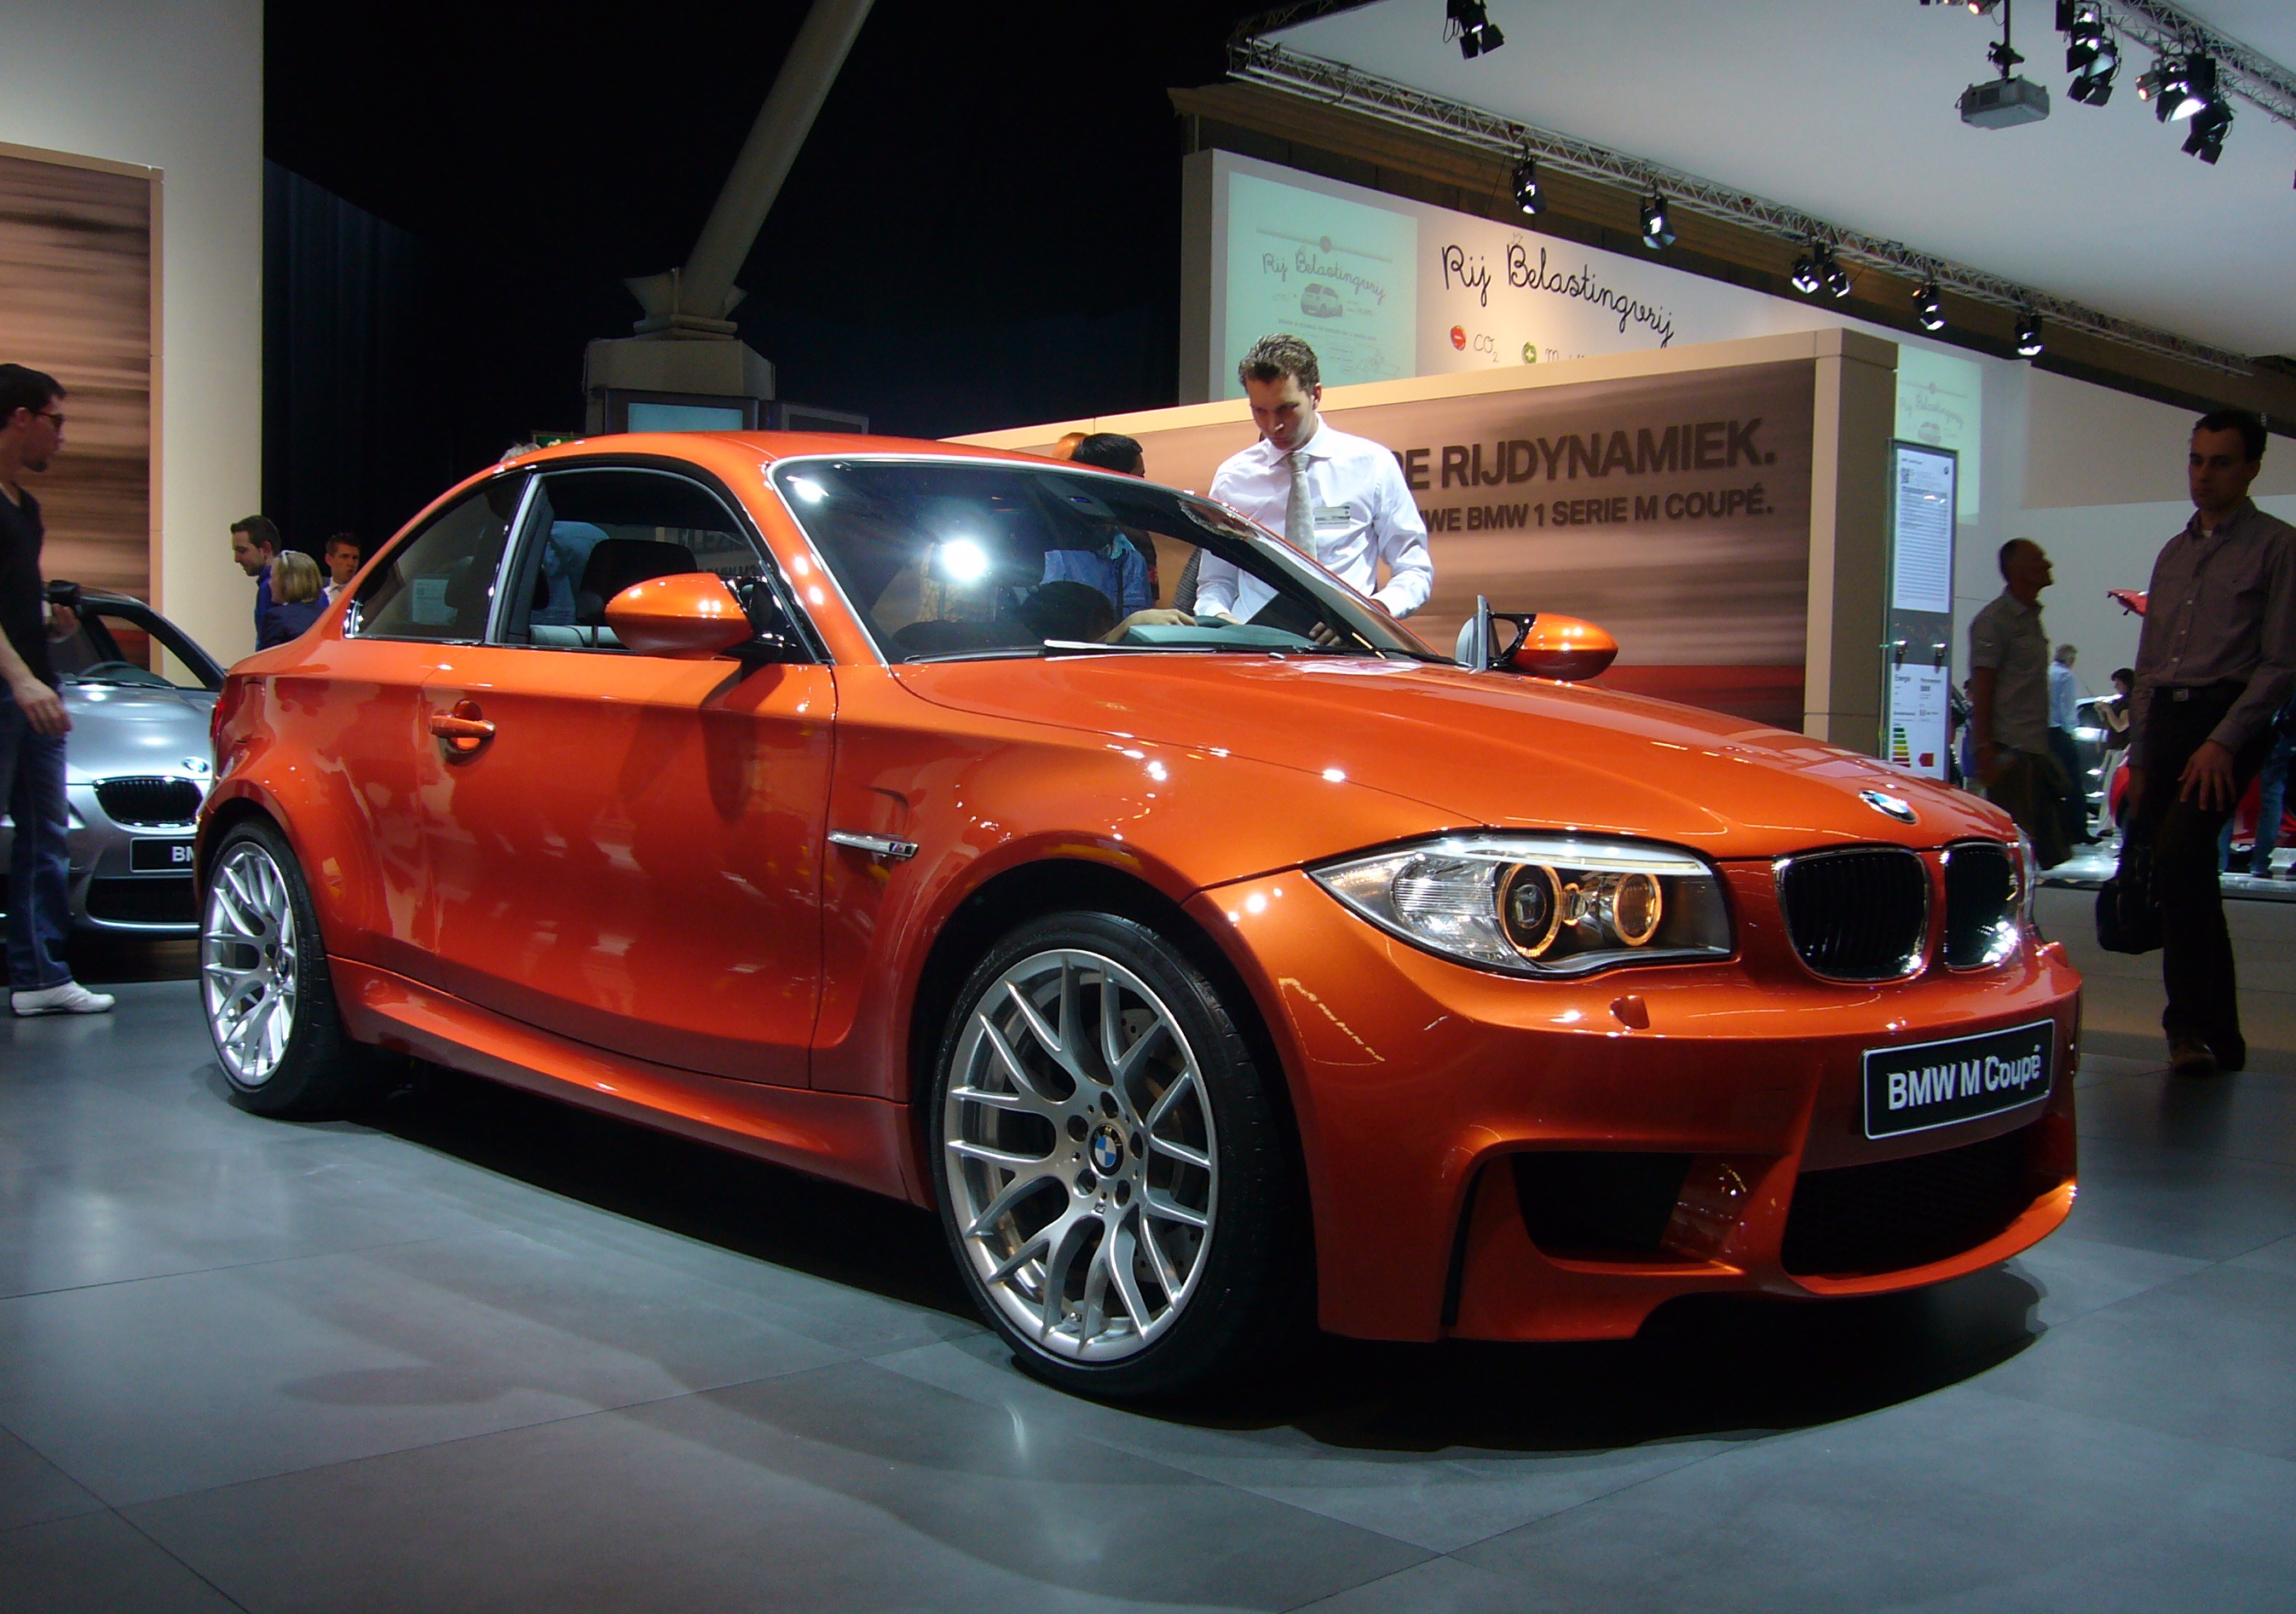 File 11 Bmw 1 Series M Coupe Jpg Wikimedia Commons